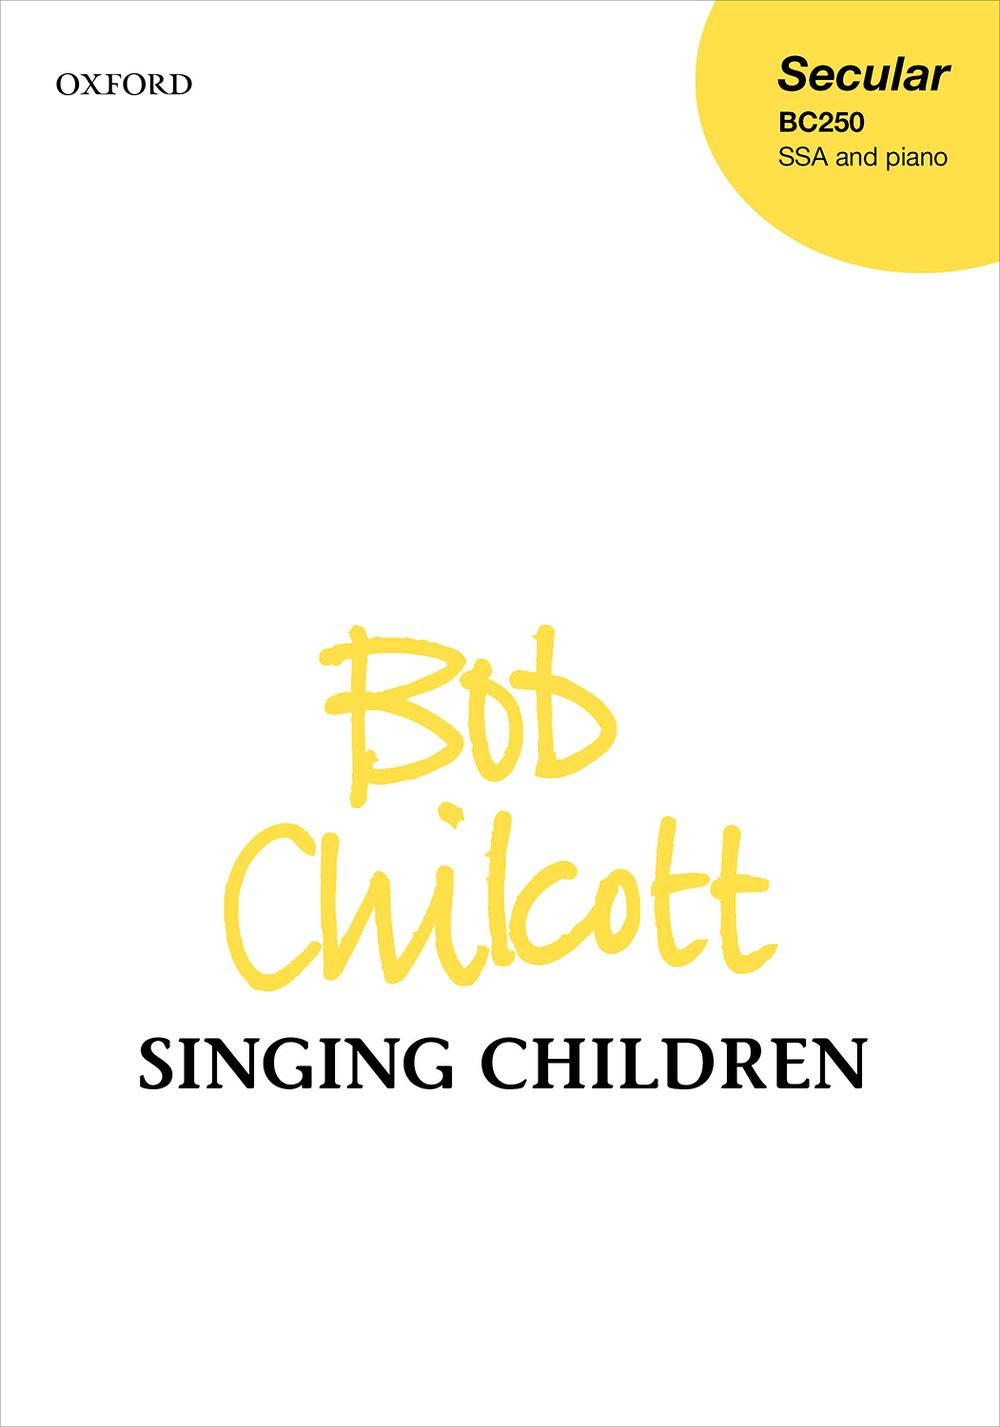 Singing Children: Upper Voices and Piano/Organ: Choral Score